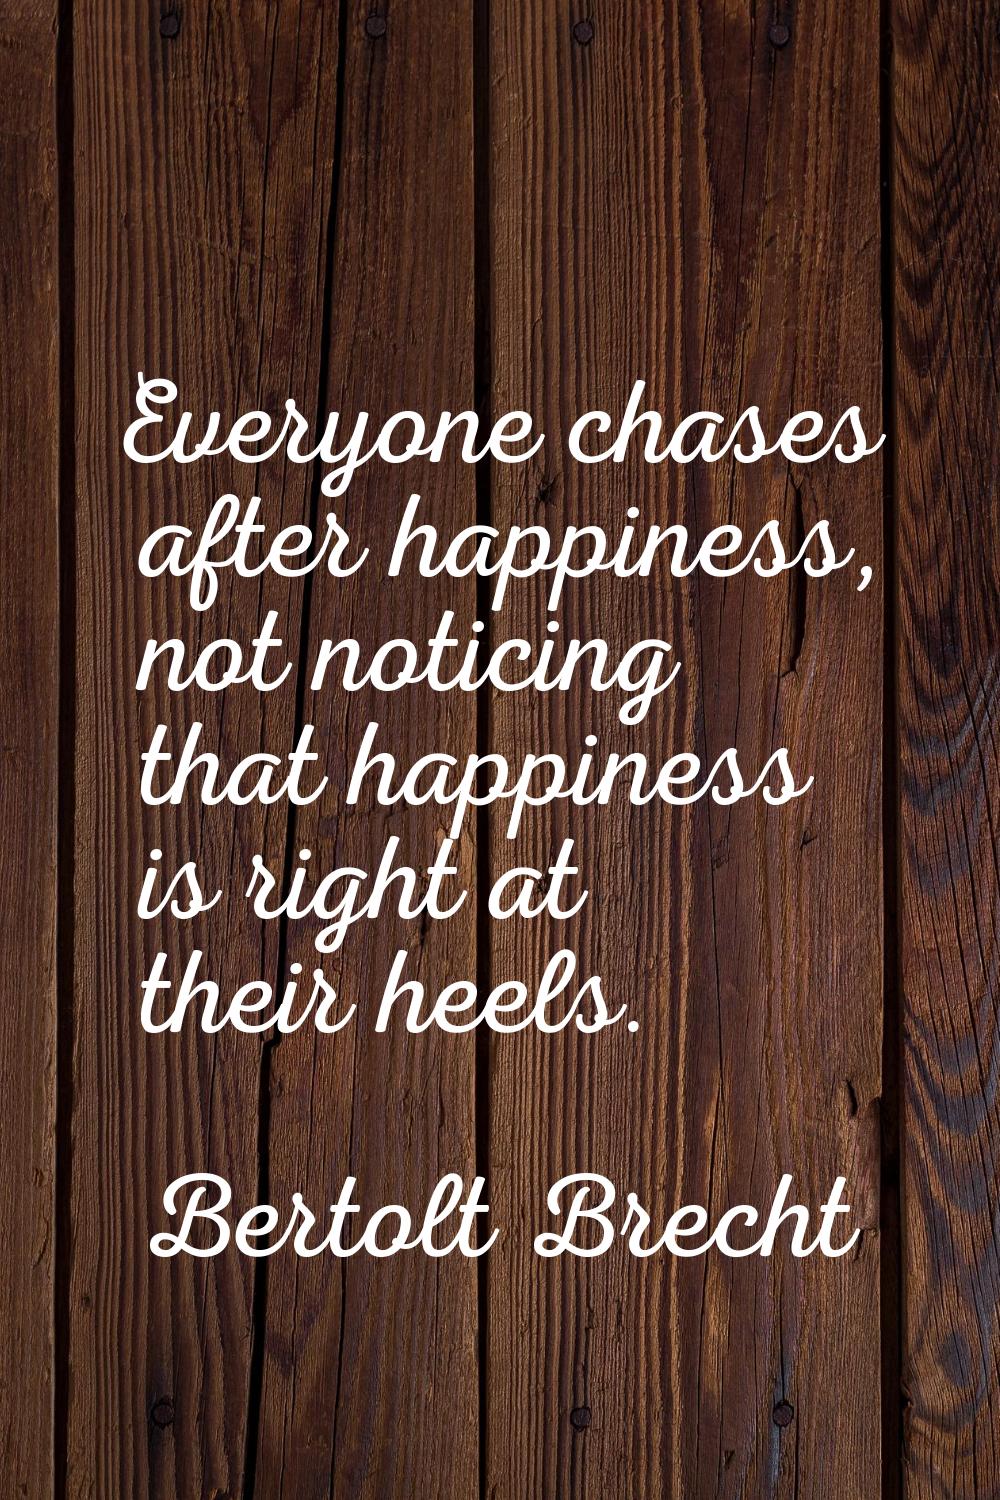 Everyone chases after happiness, not noticing that happiness is right at their heels.